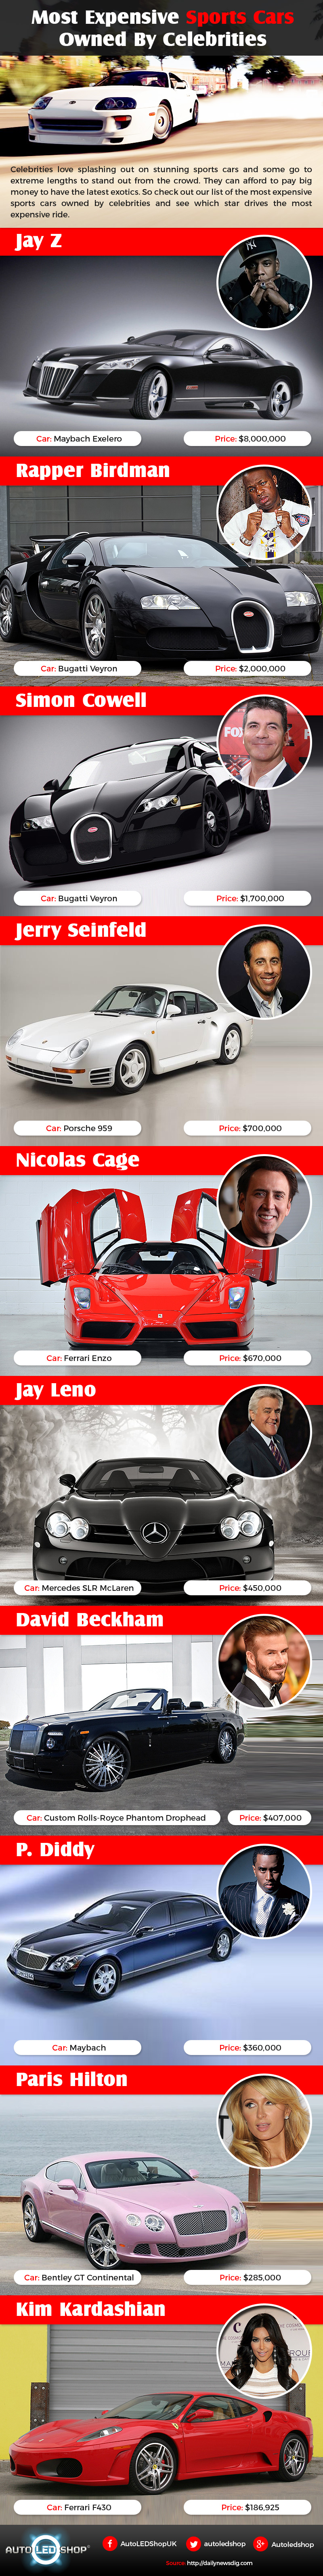 Most Expensive Sports Cars Owned By Celebrities